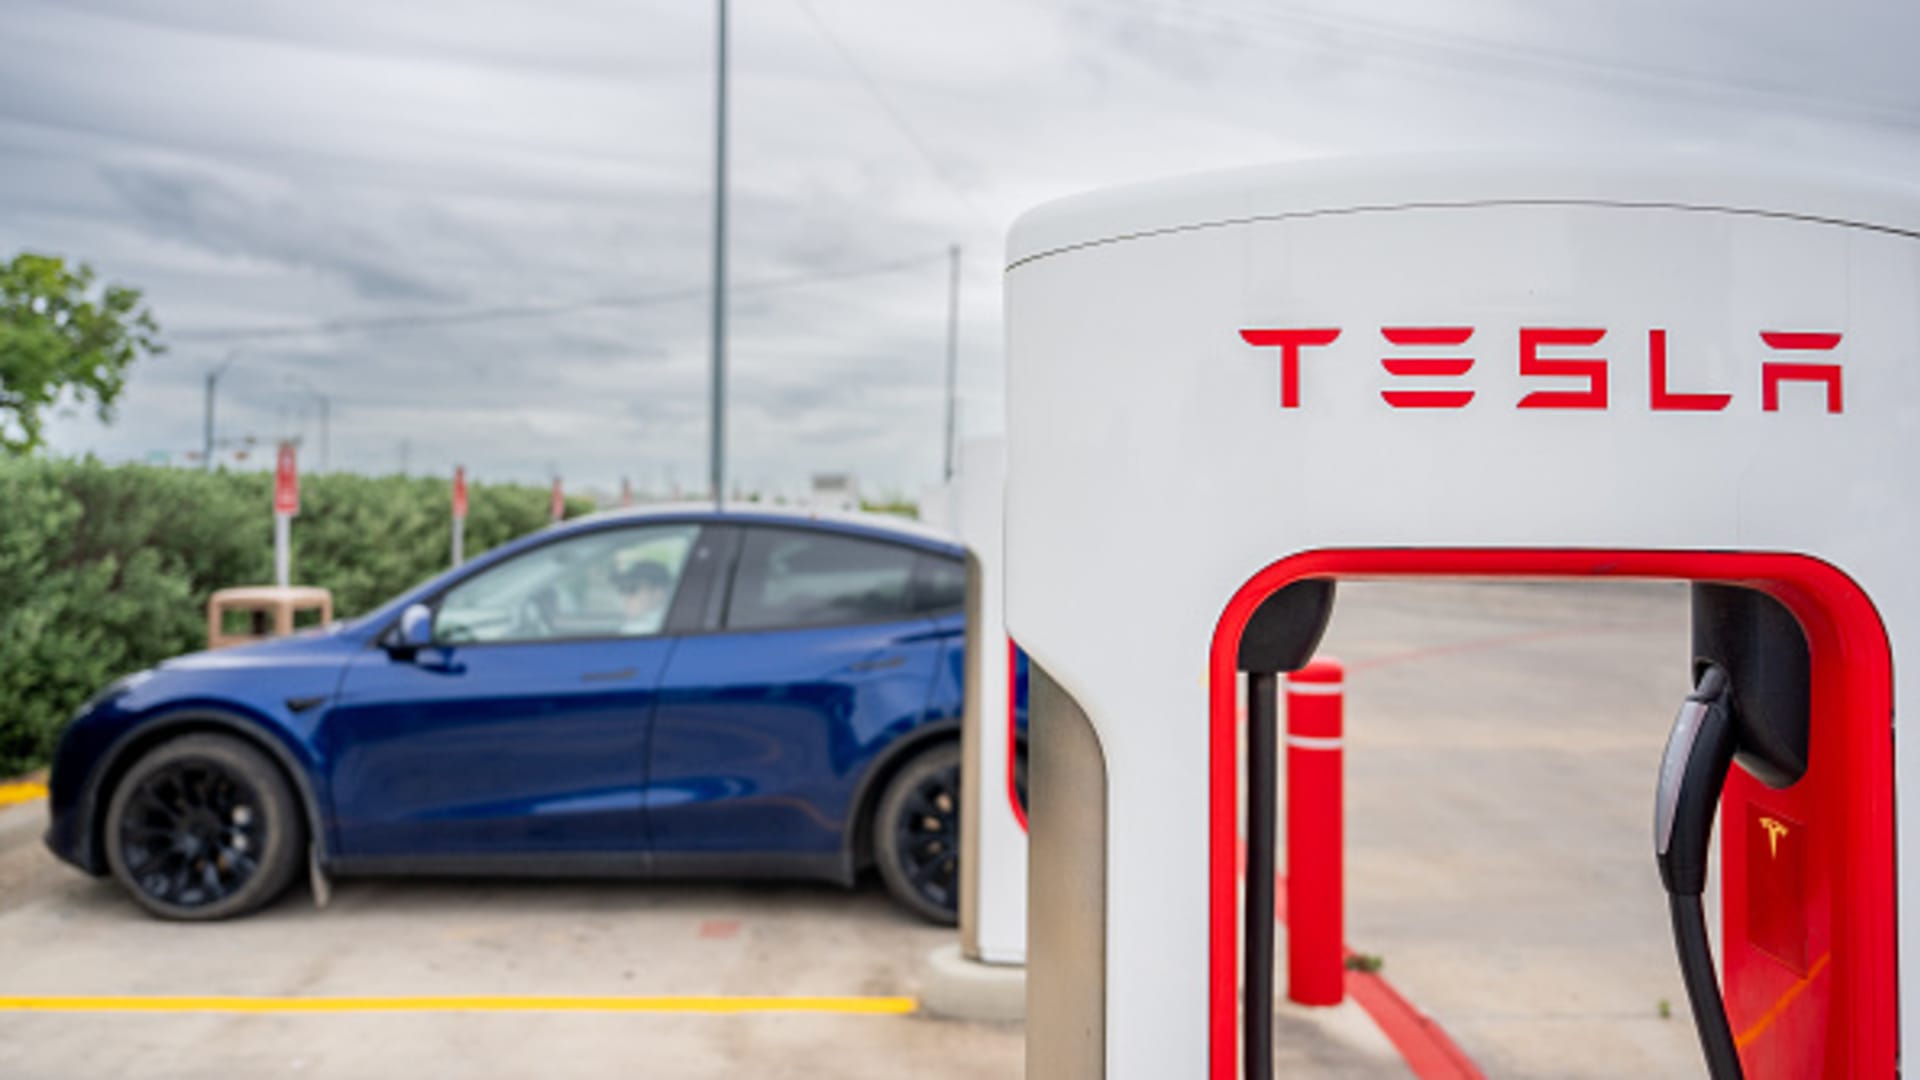 Tesla to face a ‘huge demand problem’ over price cuts, says investor [Video]